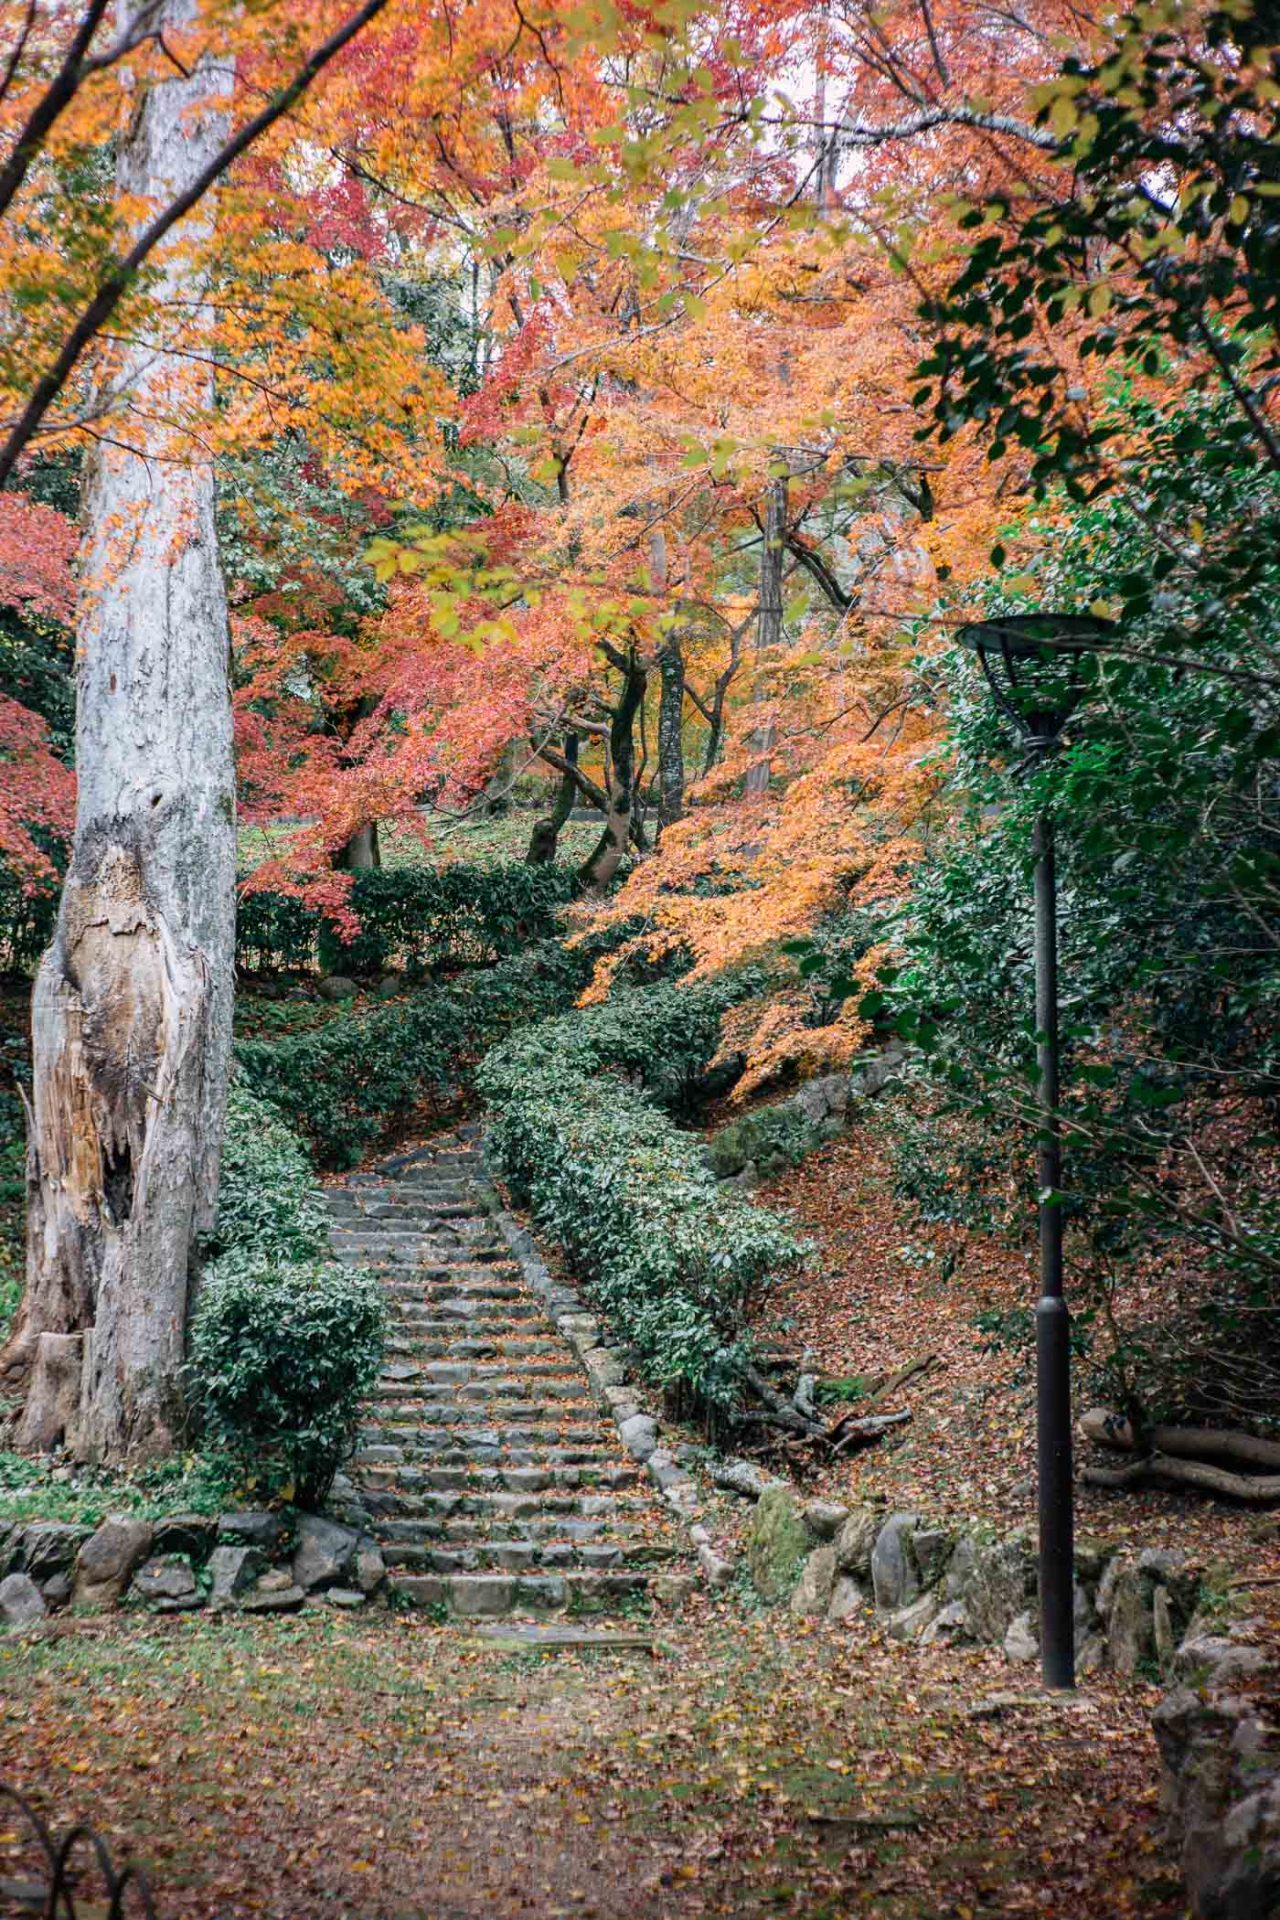 Not just ordinary stairs
Kyoto, November 2019
Instagram | YouTube